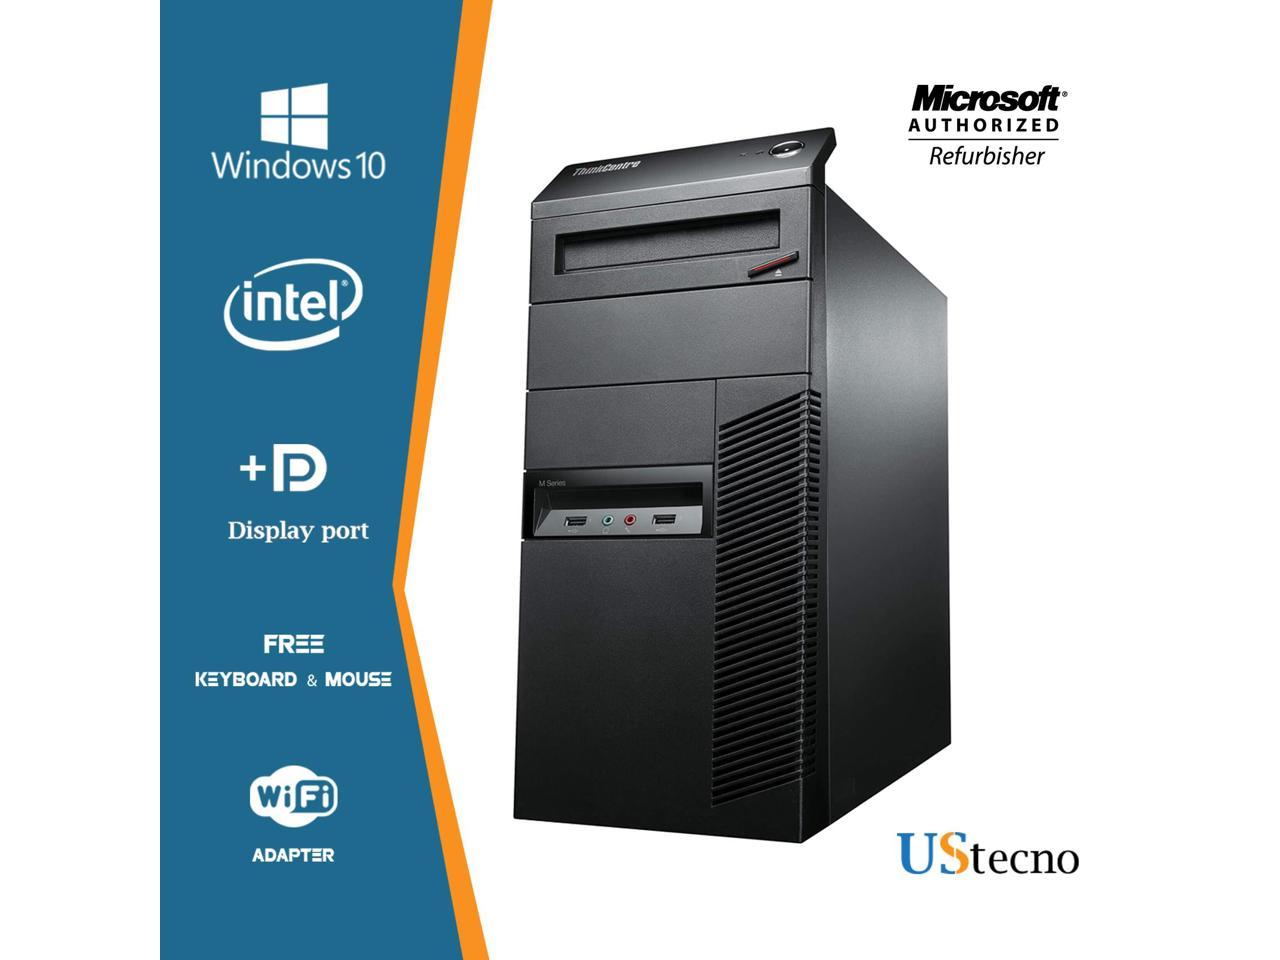 Lenovo ThinkCentre M91p Tower Desktop Computer Intel Core i5 2400 16GB 256GB SSD DVD Windows 10 Professional New Free Keyboard, Mouse,Power cord,WiFi Adapter